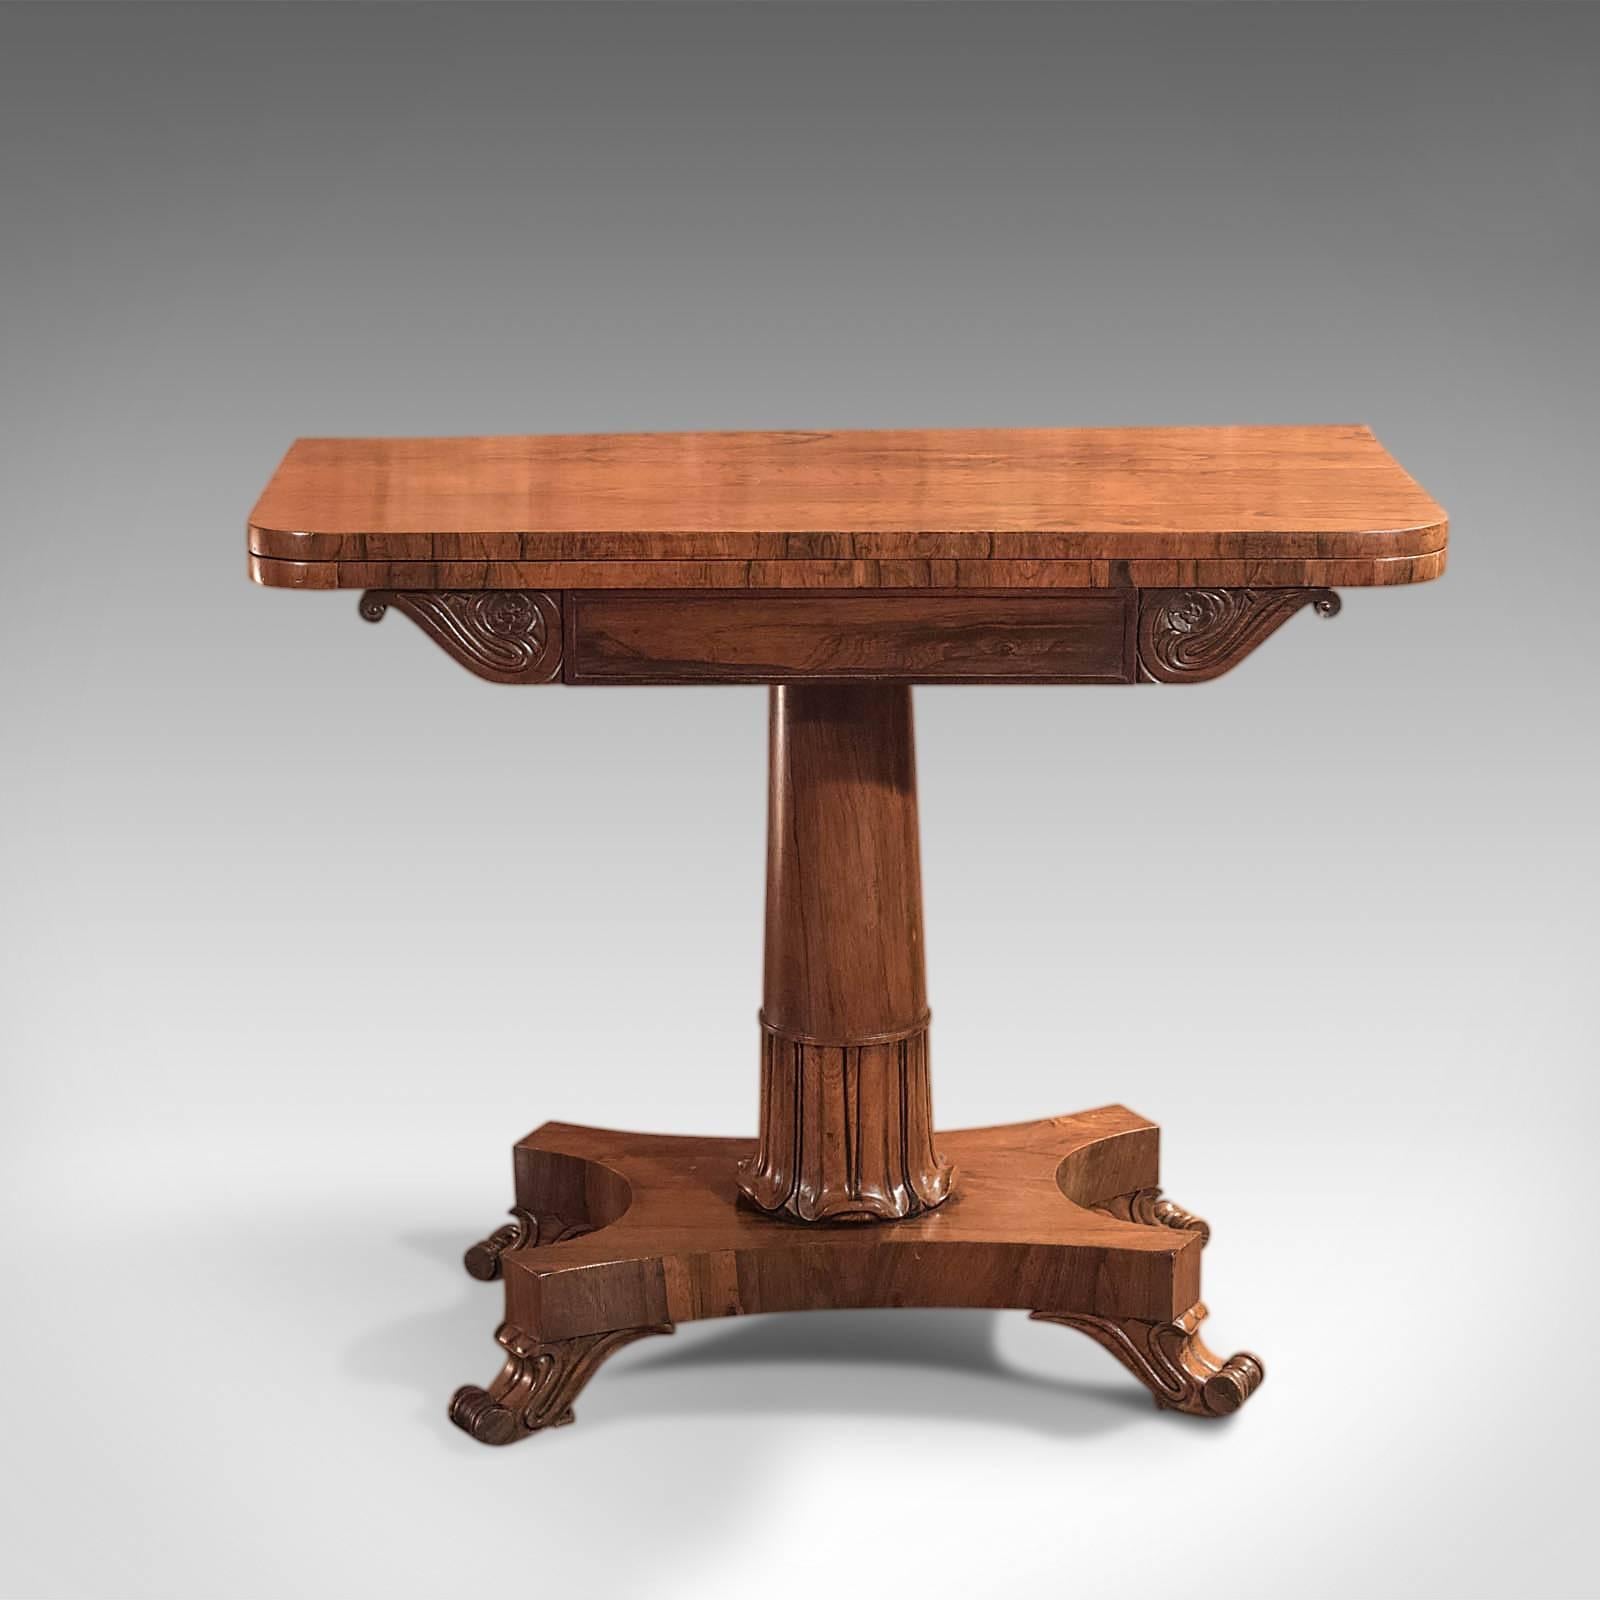 This is an antique, fold-over card table dating to the mid-Victorian period, circa 1850.

This table displays the most wonderful rosewood grain detail and a desirable aged patina in a piece of good proportion. Closed, it makes for an attractive